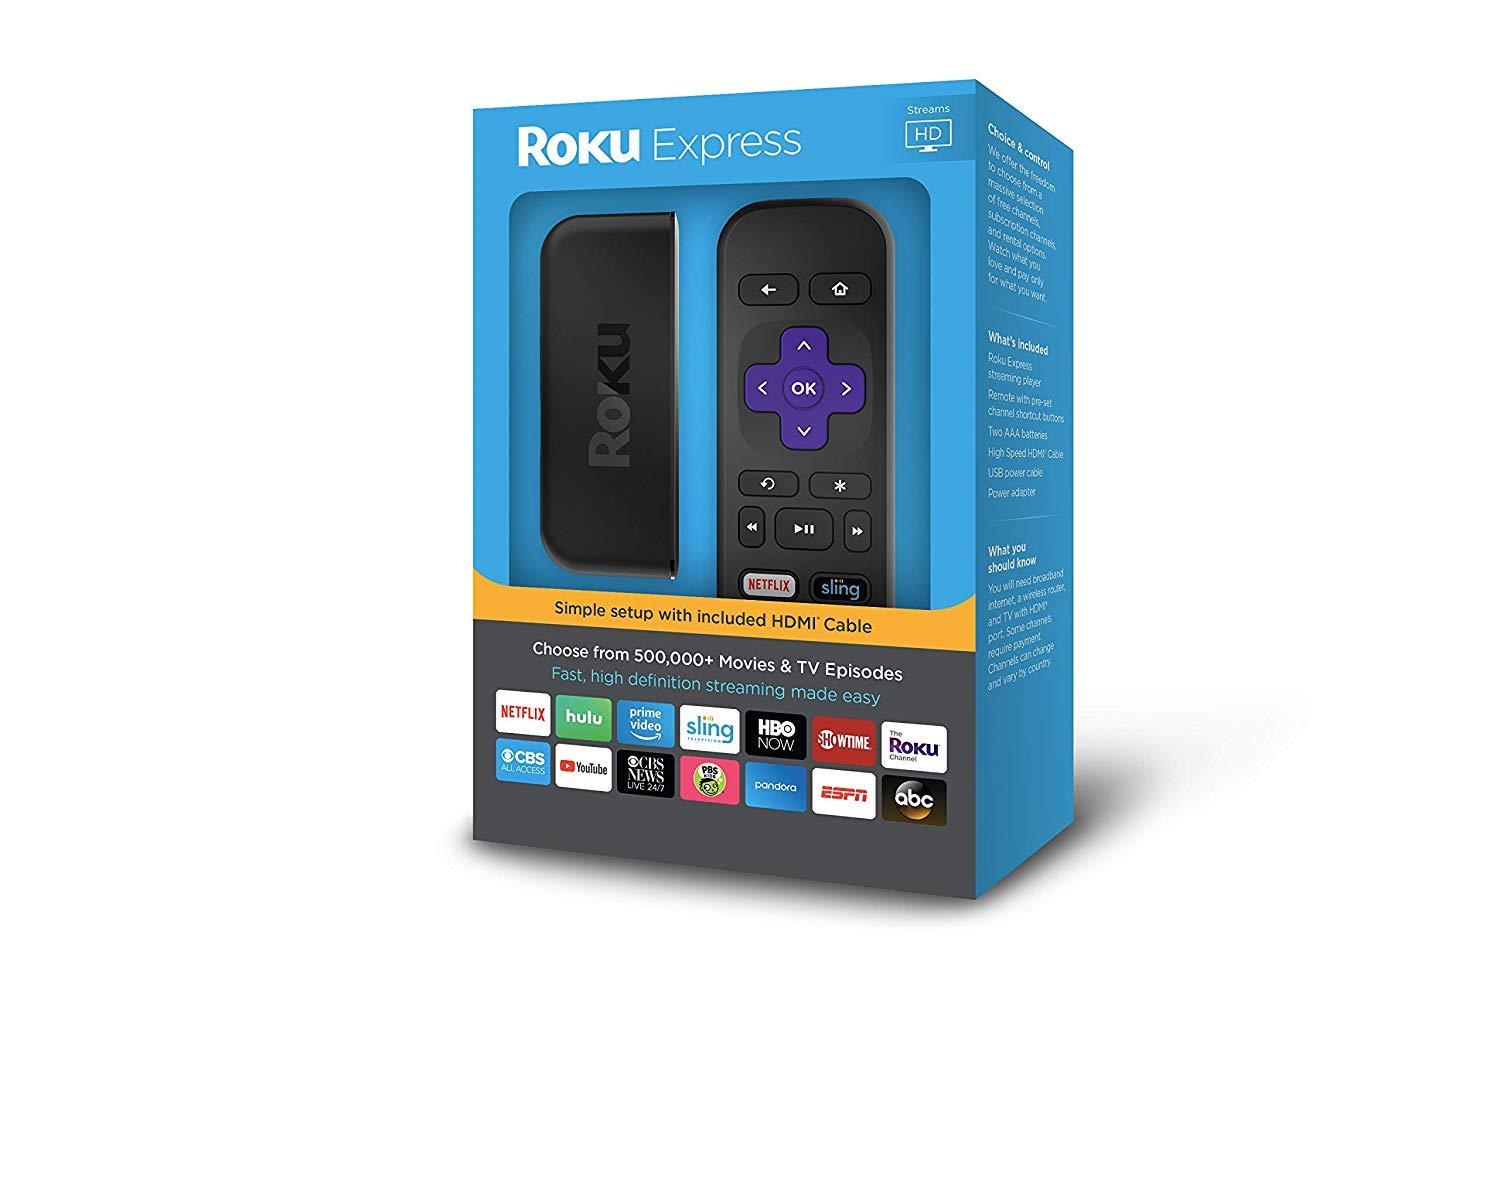 Roku Express - Easy High Definition (HD) Streaming Media Player